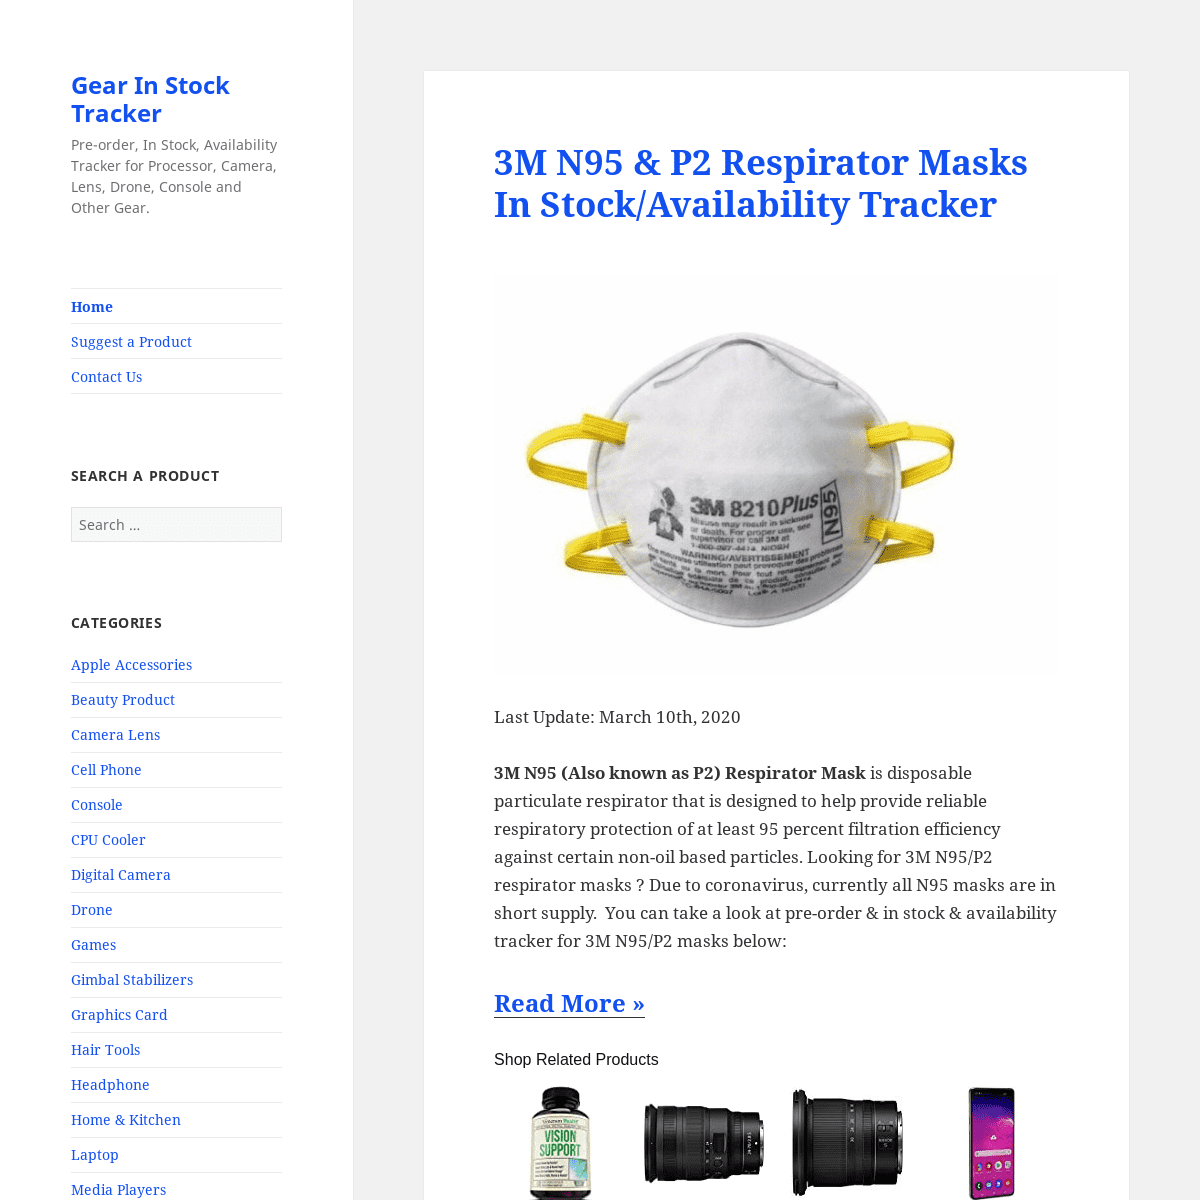 A complete backup of gearinstock.com